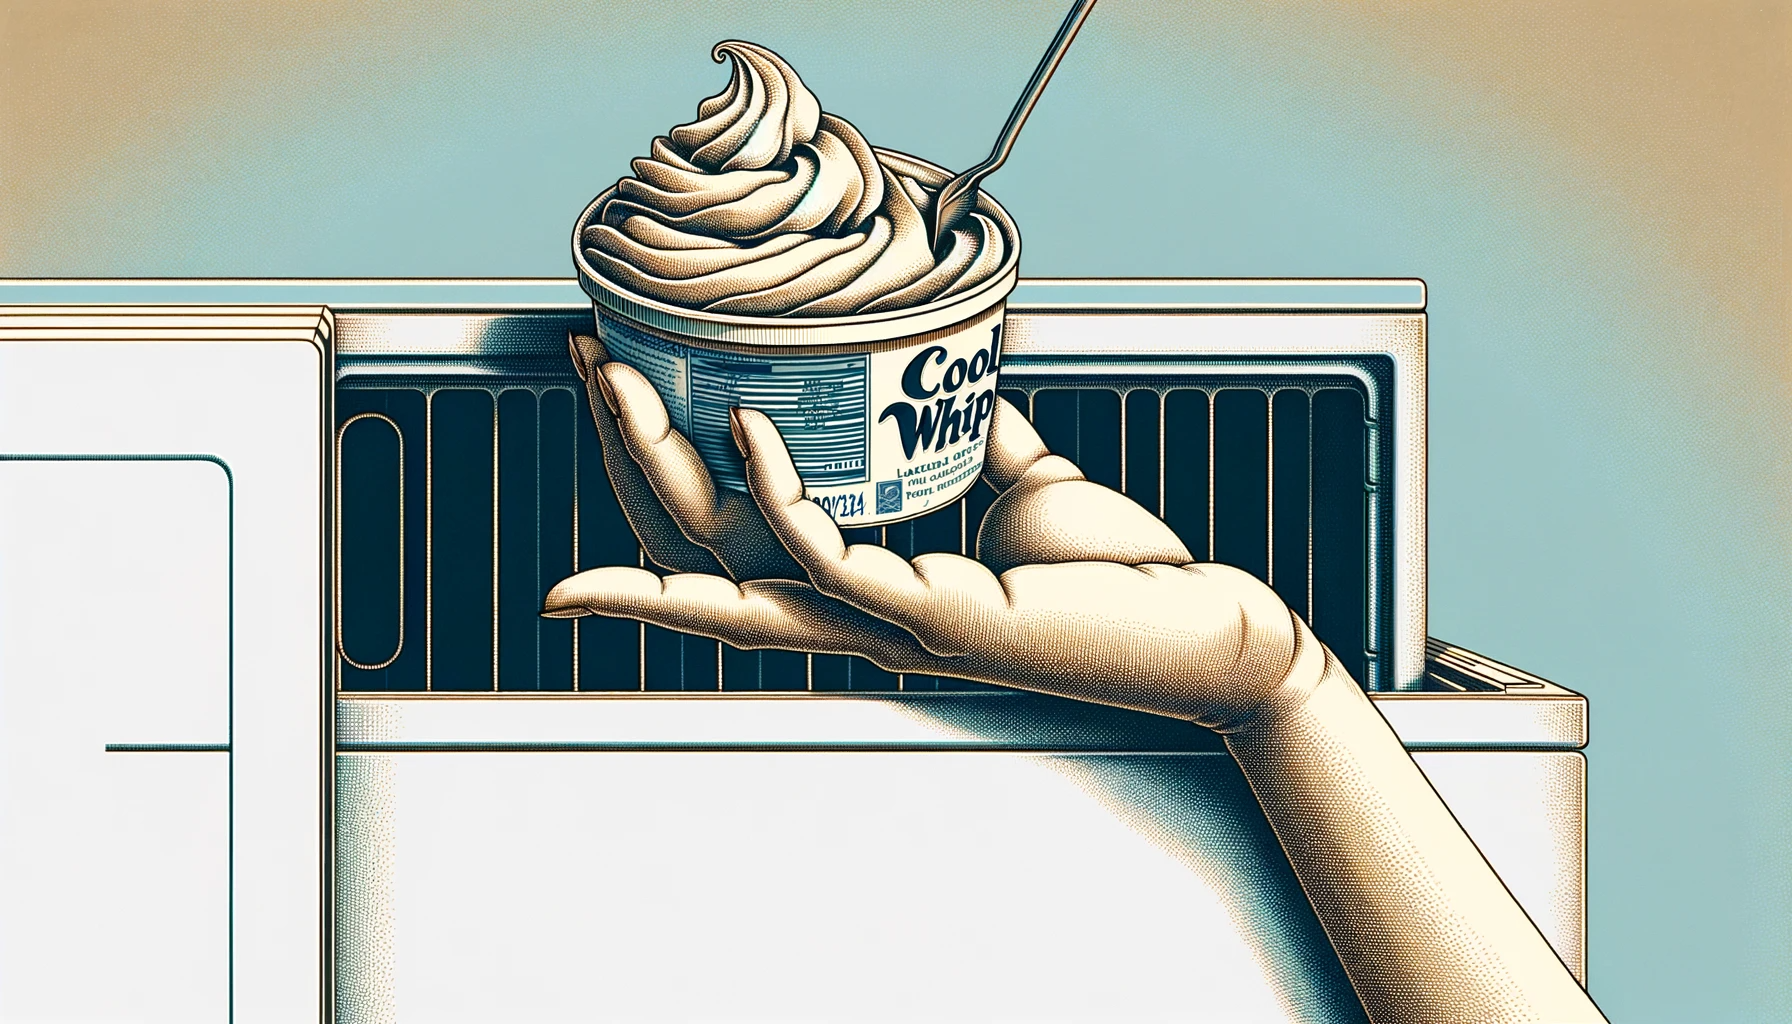 Tasty-Looking Cool Whip Being Placed Into A Freezer By Human Hands Set On A Light Blue Background